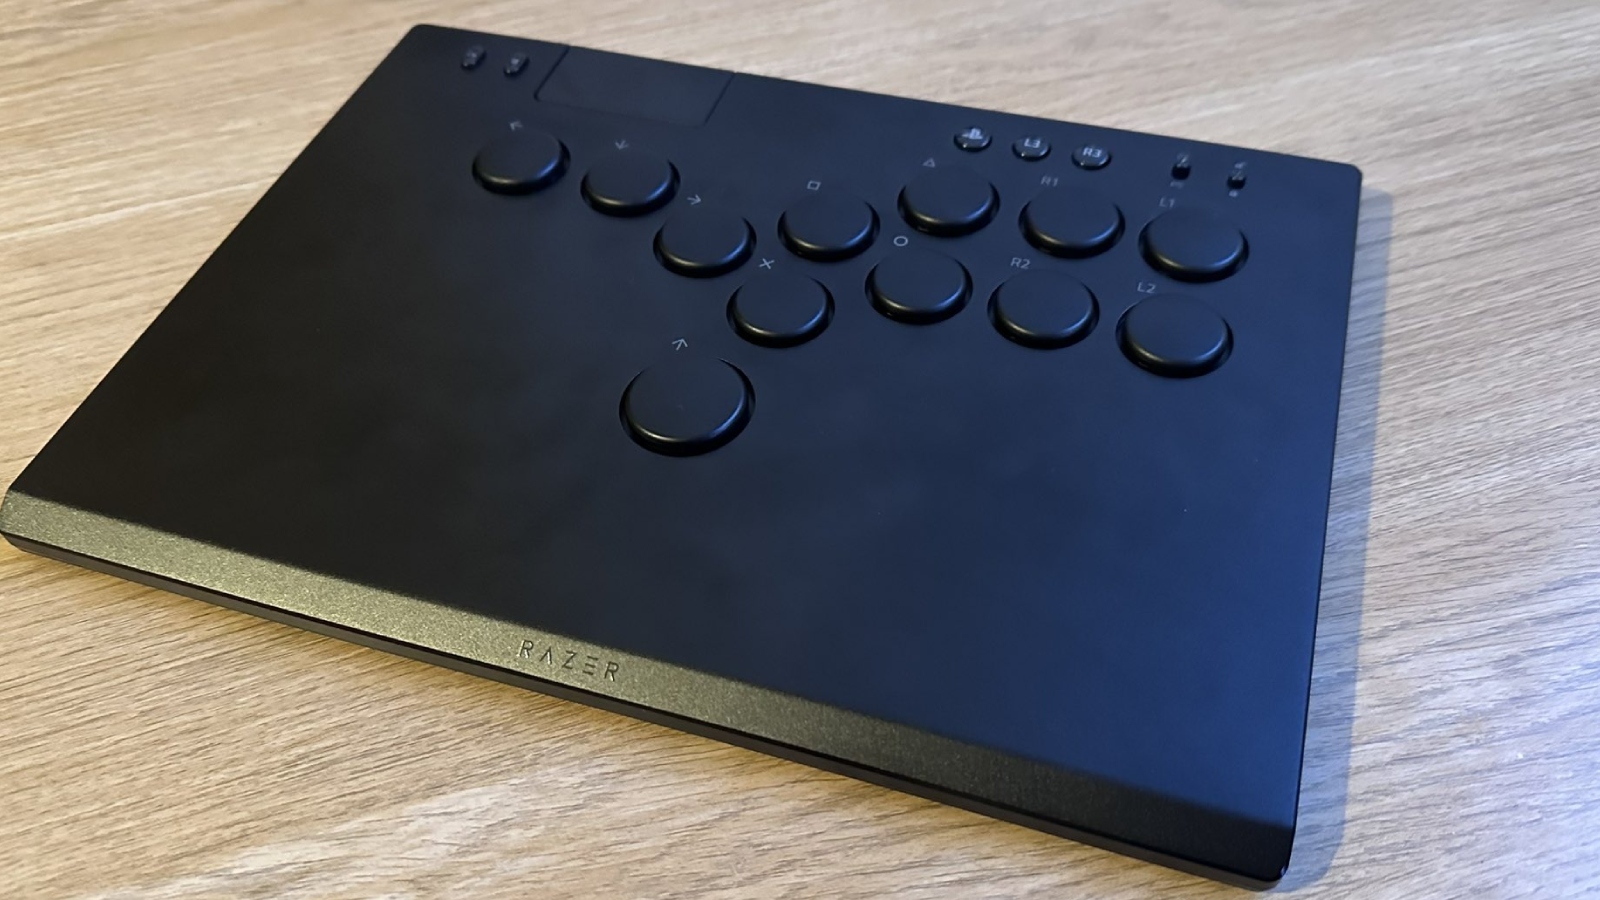 Razer Kitsune Review - Compact With A Steep Learning Curve –